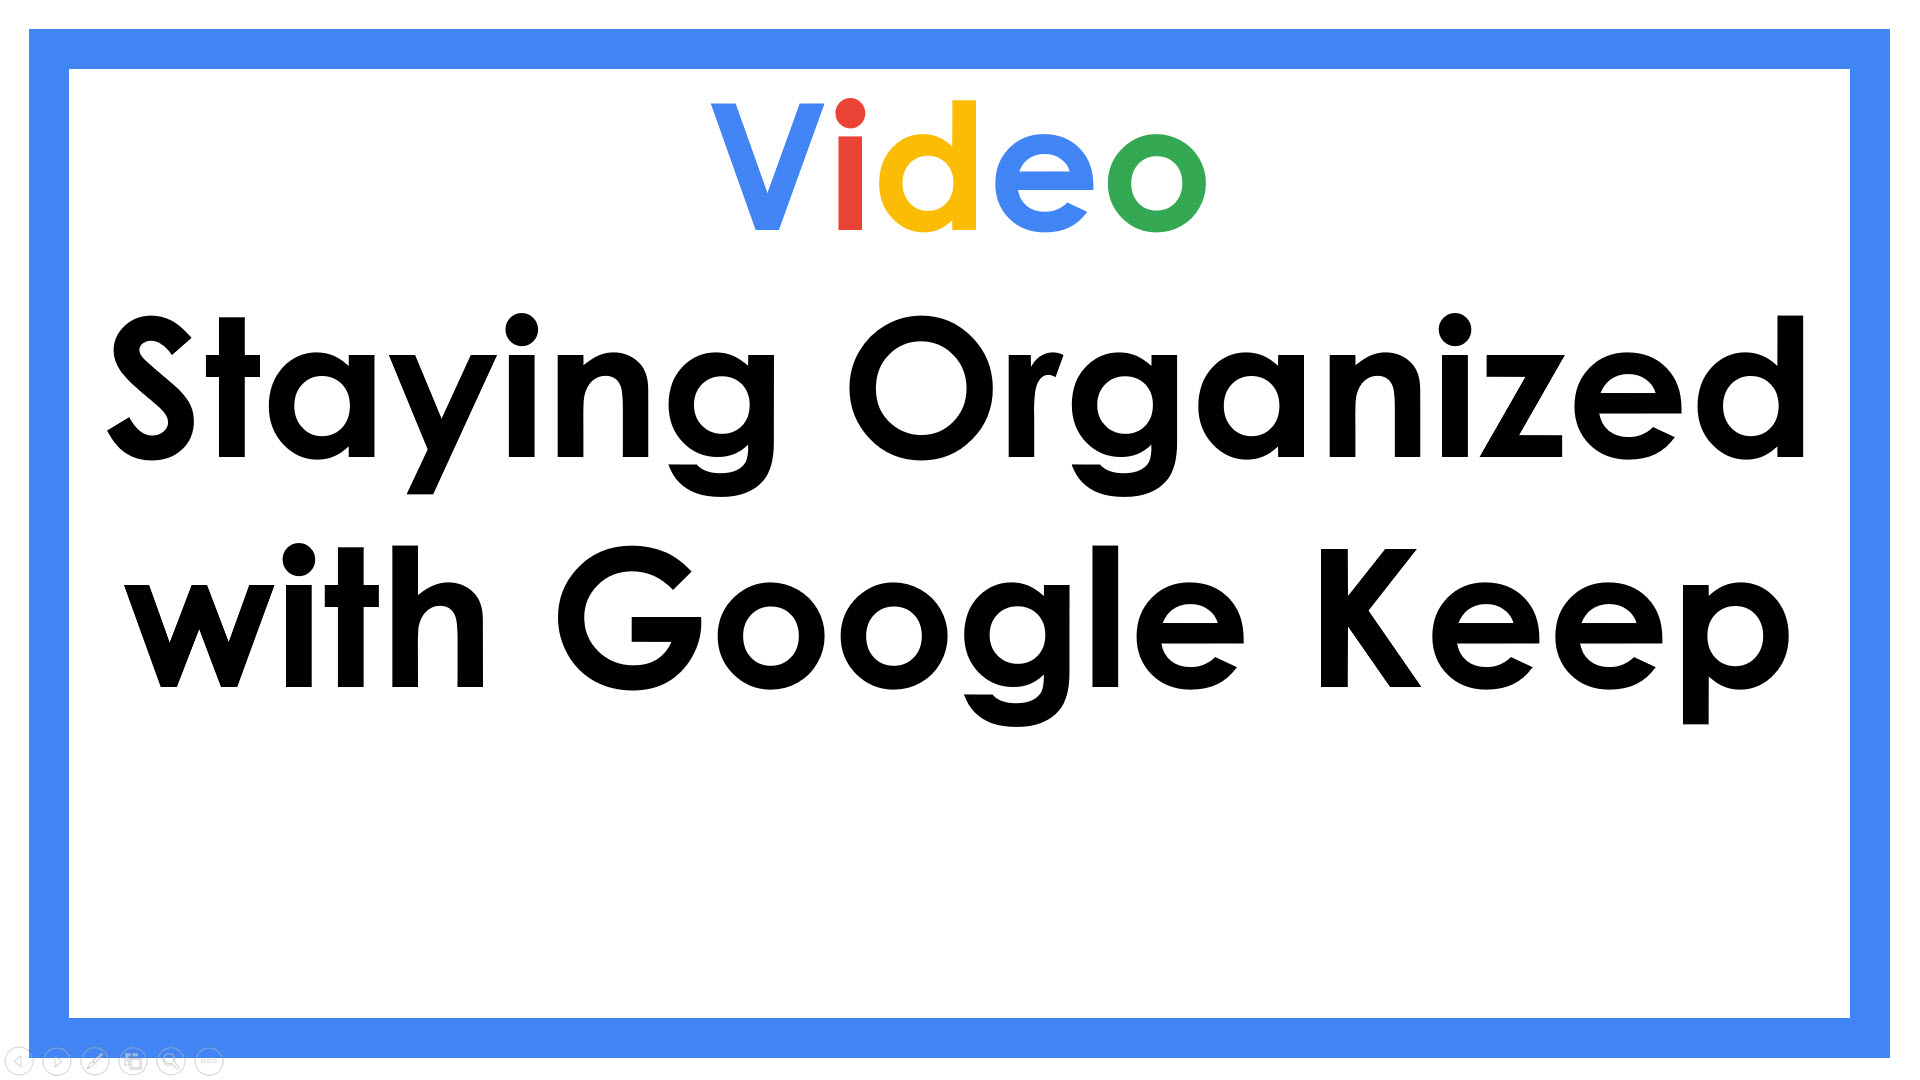 Staying Organized with Google Keep